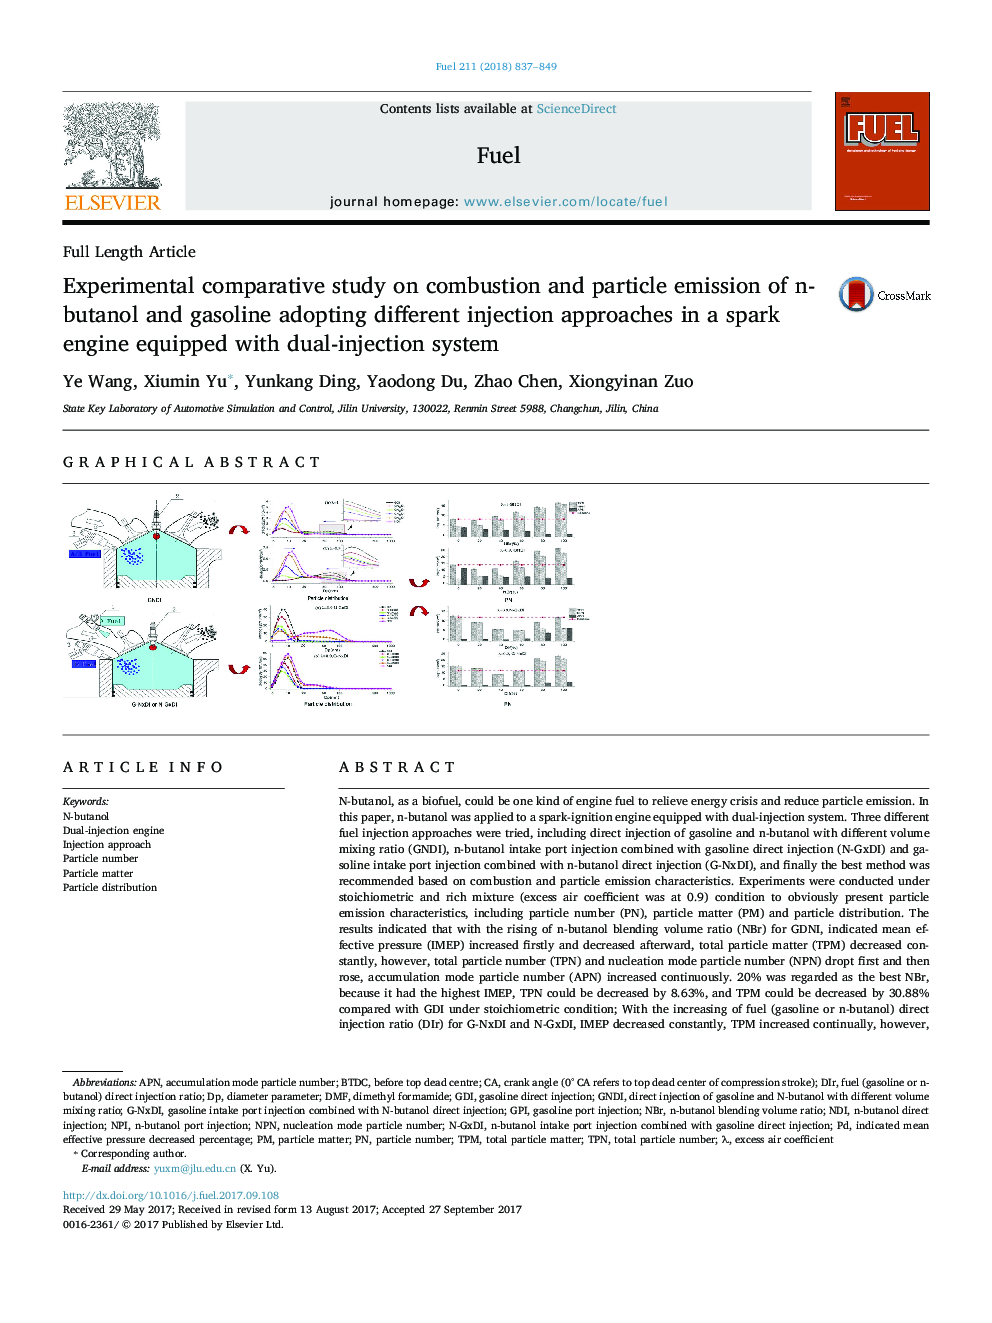 Experimental comparative study on combustion and particle emission of n-butanol and gasoline adopting different injection approaches in a spark engine equipped with dual-injection system